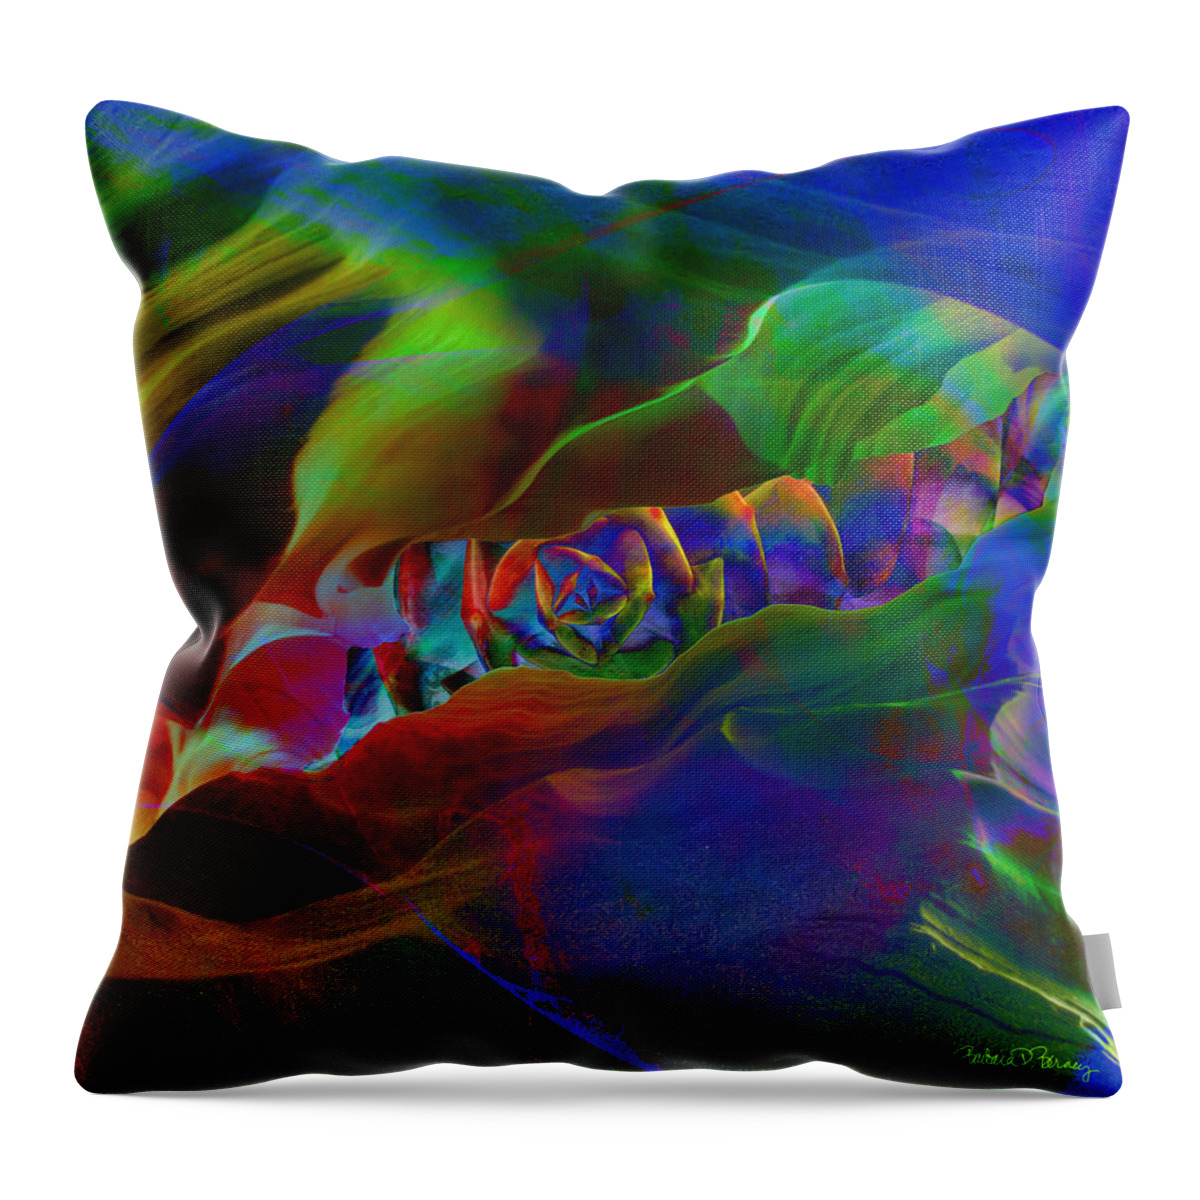 Abstract Throw Pillow featuring the digital art Burrow by Barbara Berney